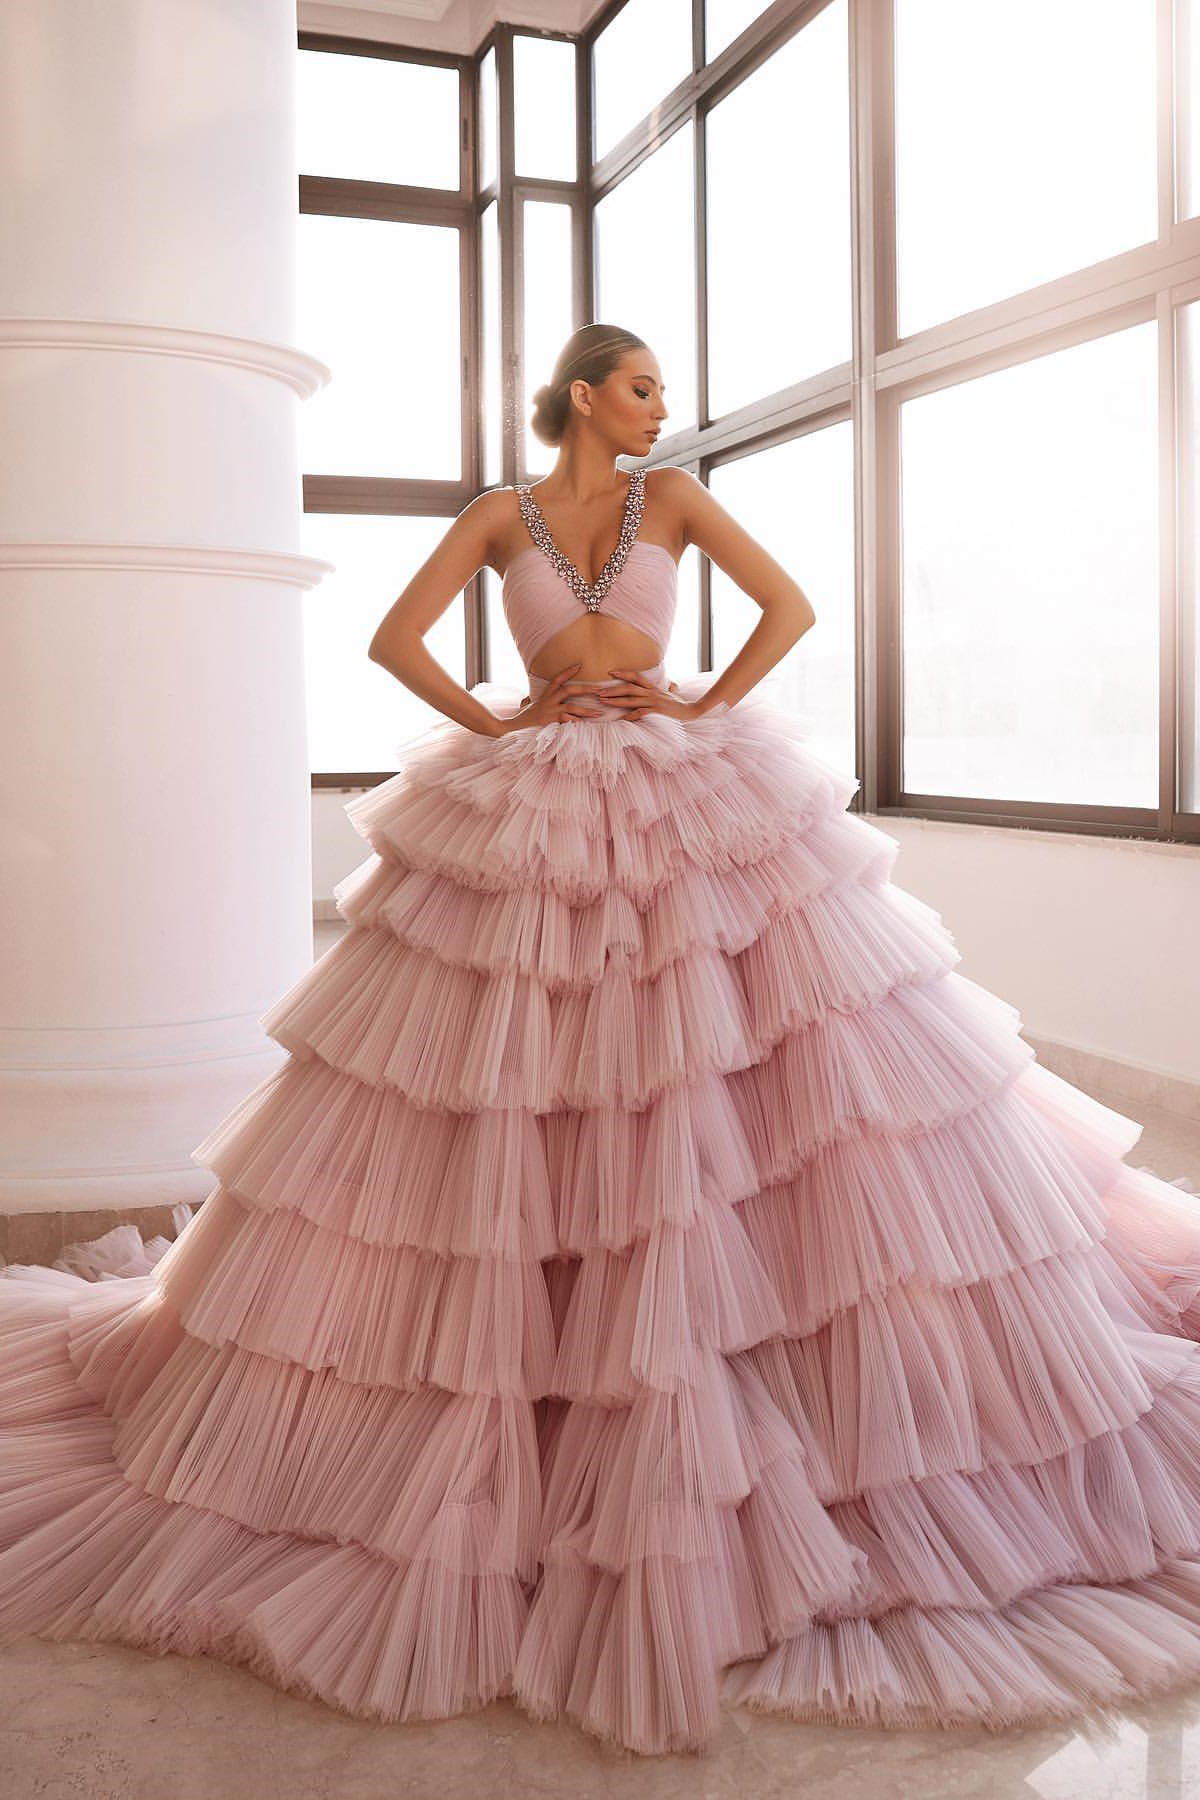 Dresseswow Pink V-Neck Sleeveless Prom Dress Tulle Layered With Crystals